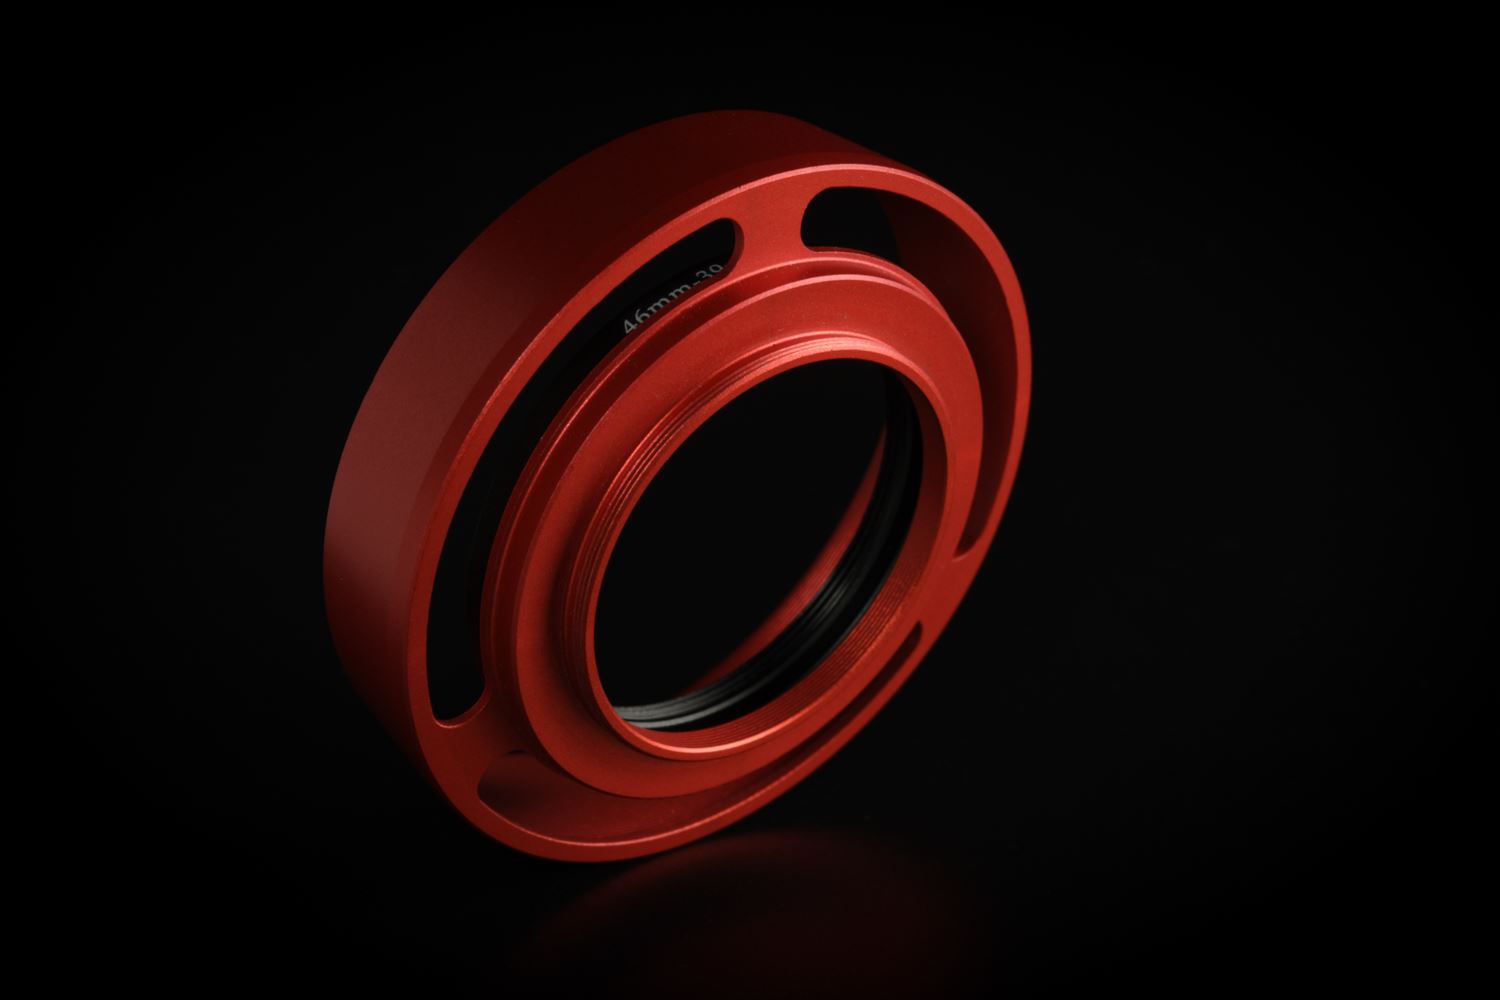 Picture of Red Ventilated Lens Hood made for Leica E39 lenses